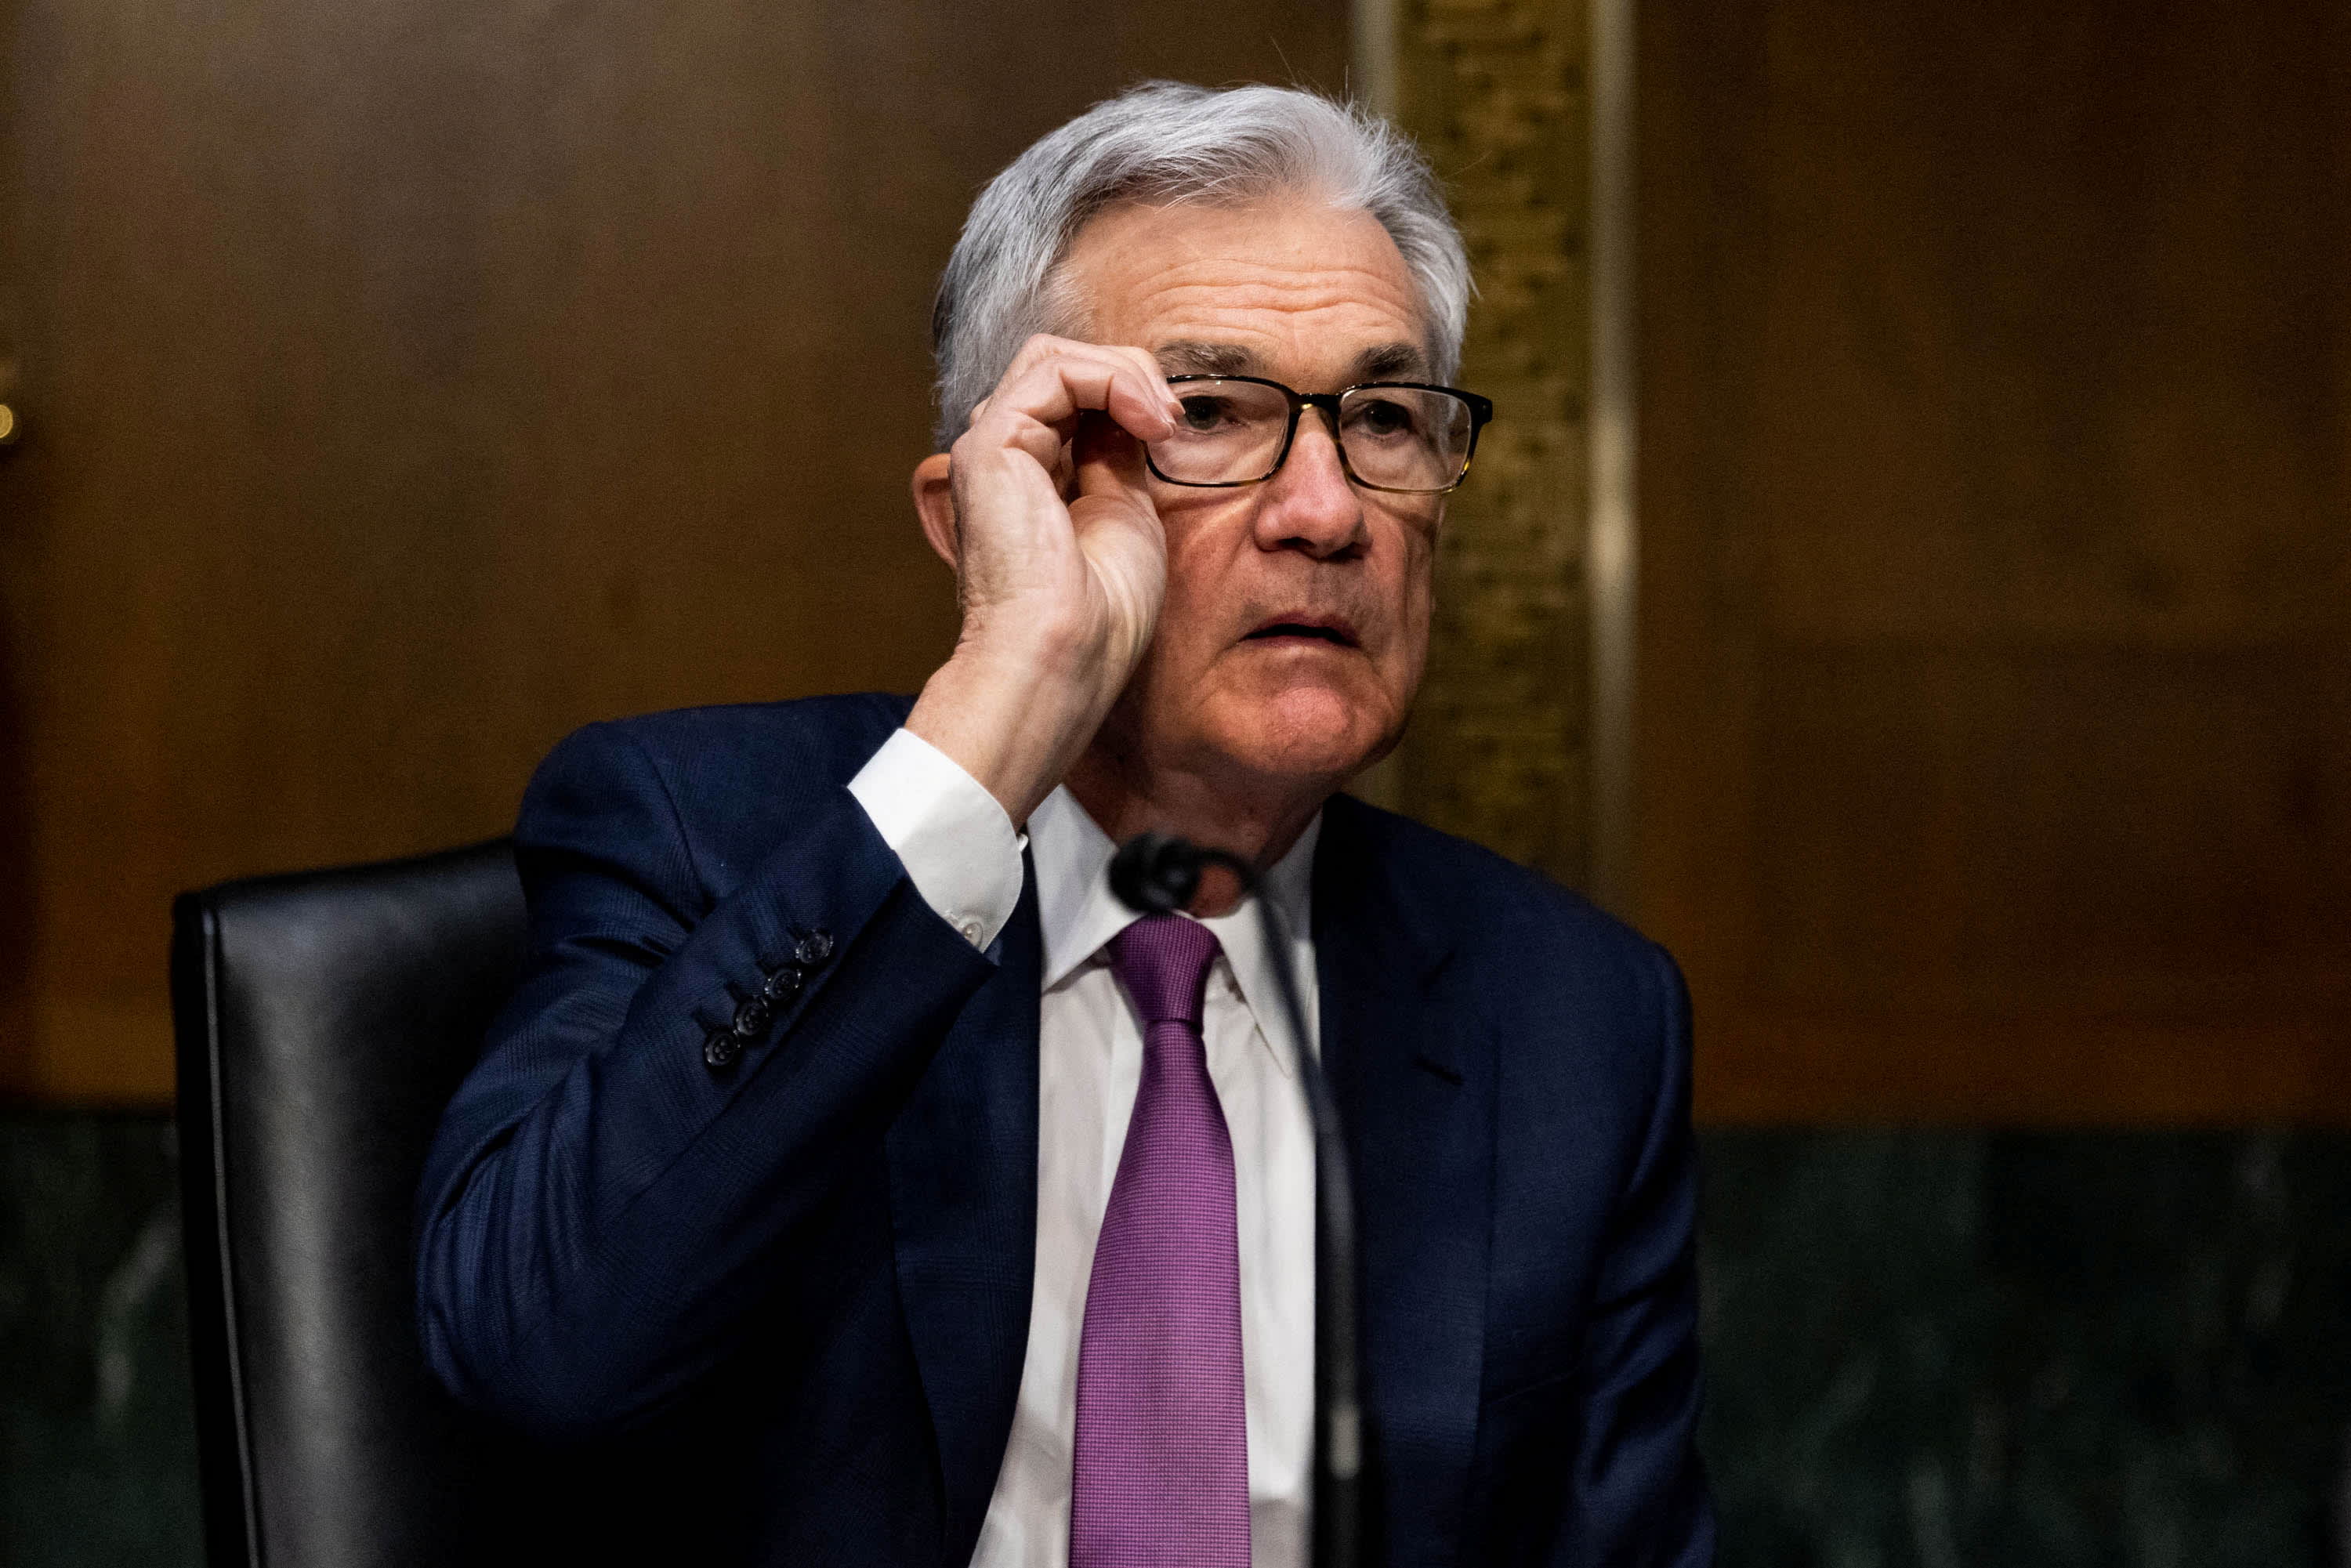 With inflation and Ukraine, Powell must thread a needle on Capitol Hill this week to calm markets